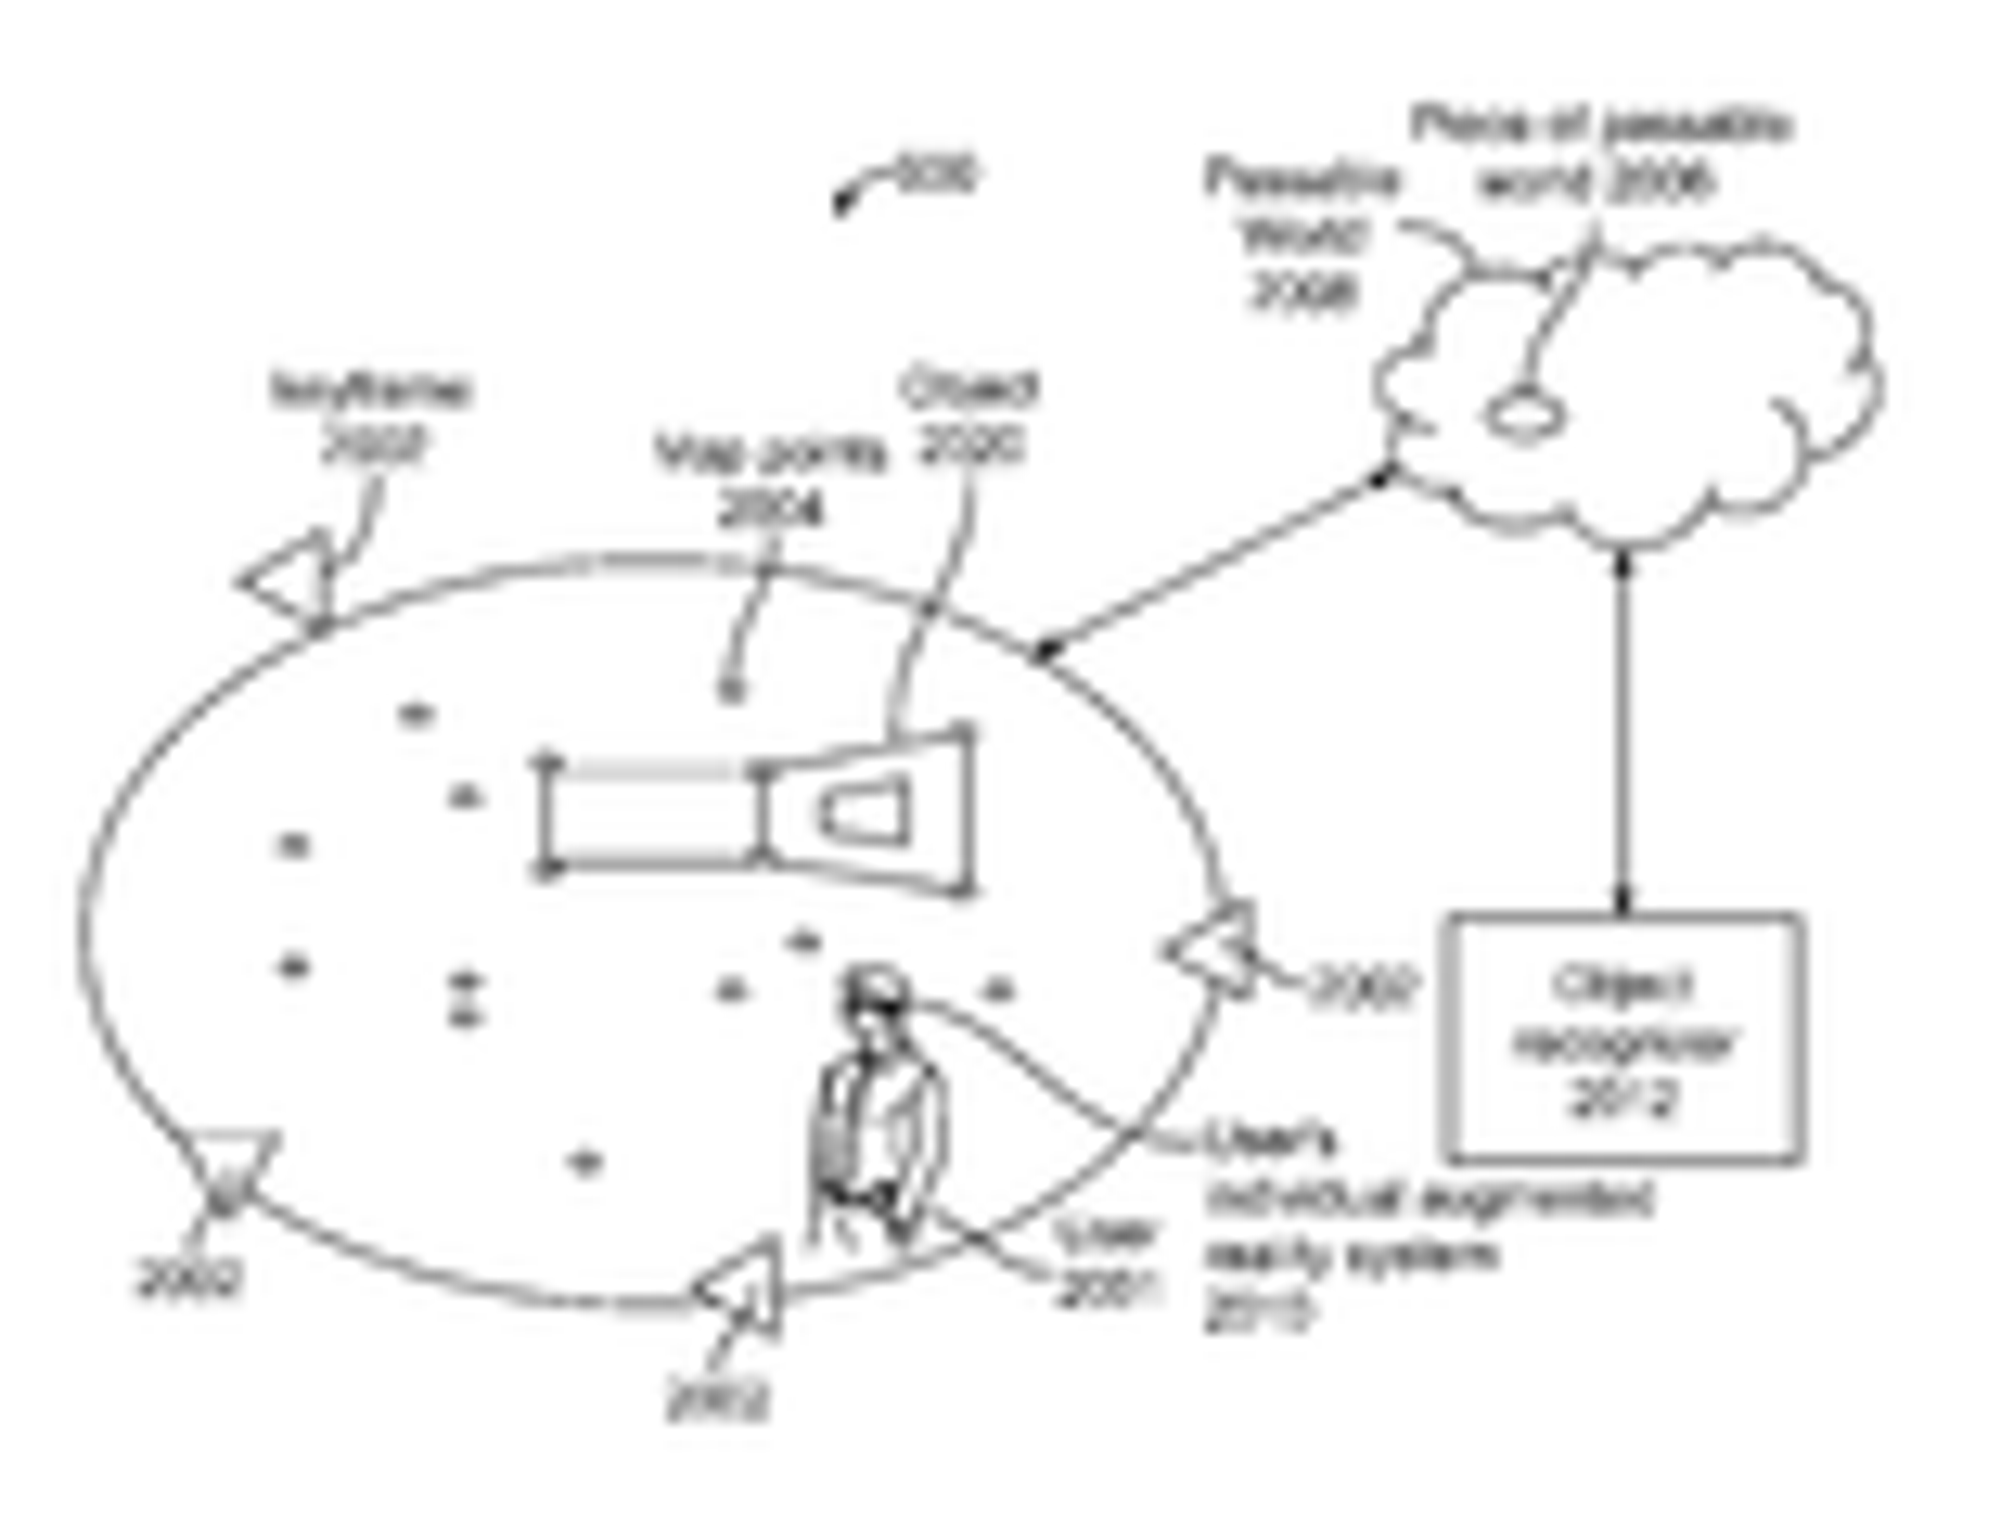 US10109108B2 - Finding new points by render rather than search in augmented or virtual reality systems - Google Patents